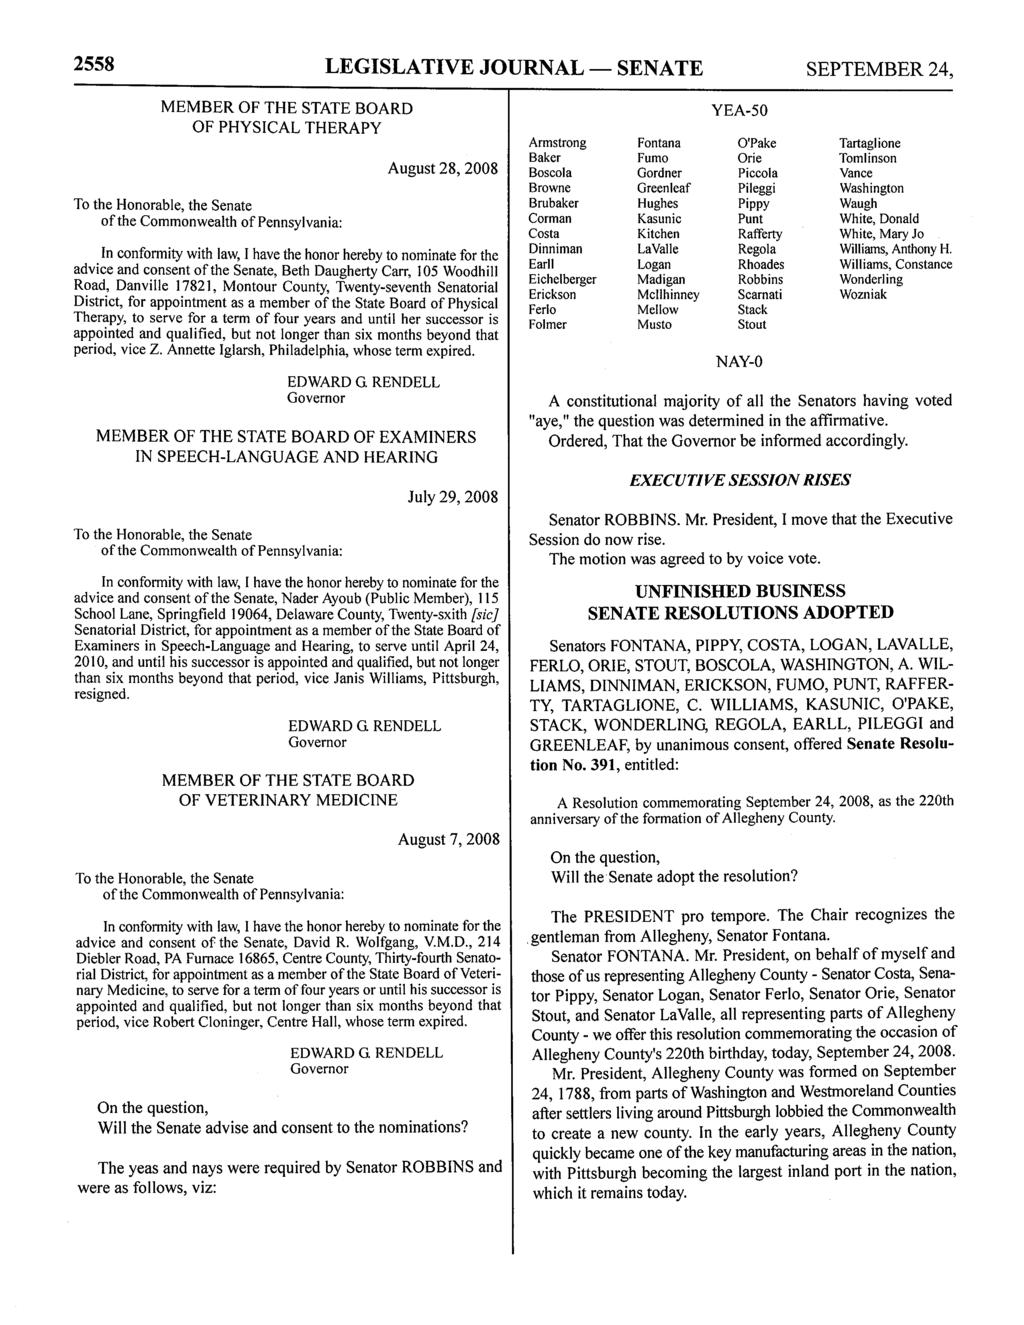 2558 LEGISLATIVE JOURNAL - SENATE SEPTEMBER 24, MEMBER OF THE STATE BOARD OF PHYSICAL THERAPY To the Honorable, the Senate of the Commonwealth of Pennsylvania: August 28, 2008 In conformity with law,